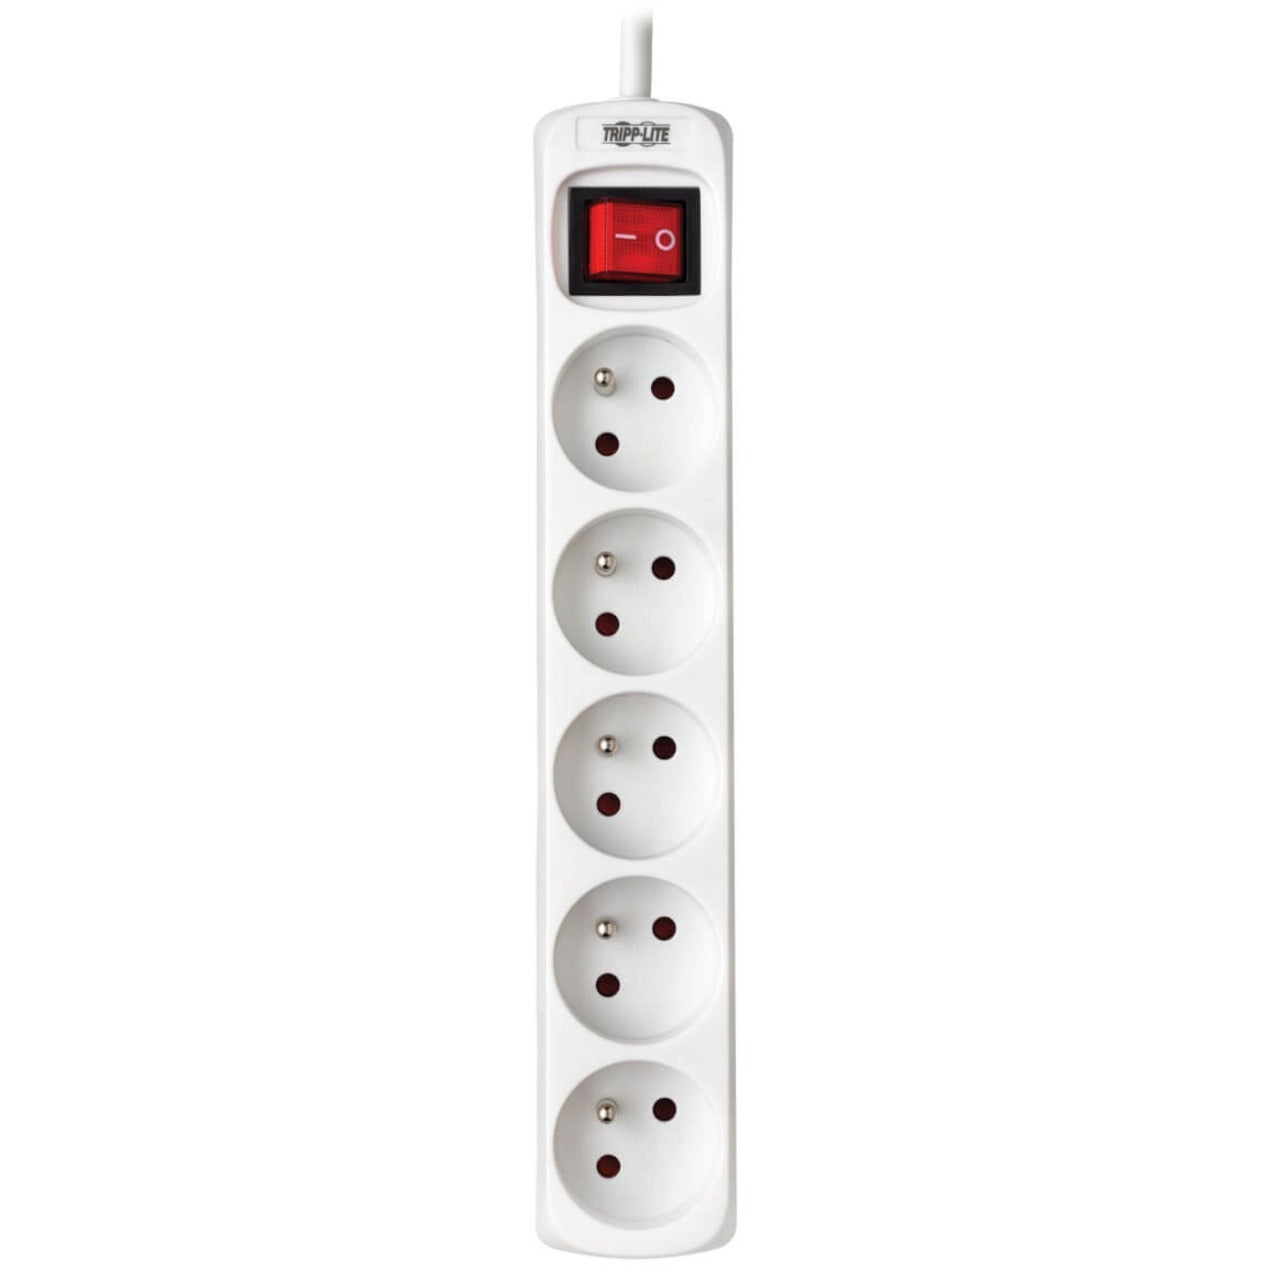 Tripp Lite PS5F15 Protect It! 5-Outlet Power Strip, French Type E, White